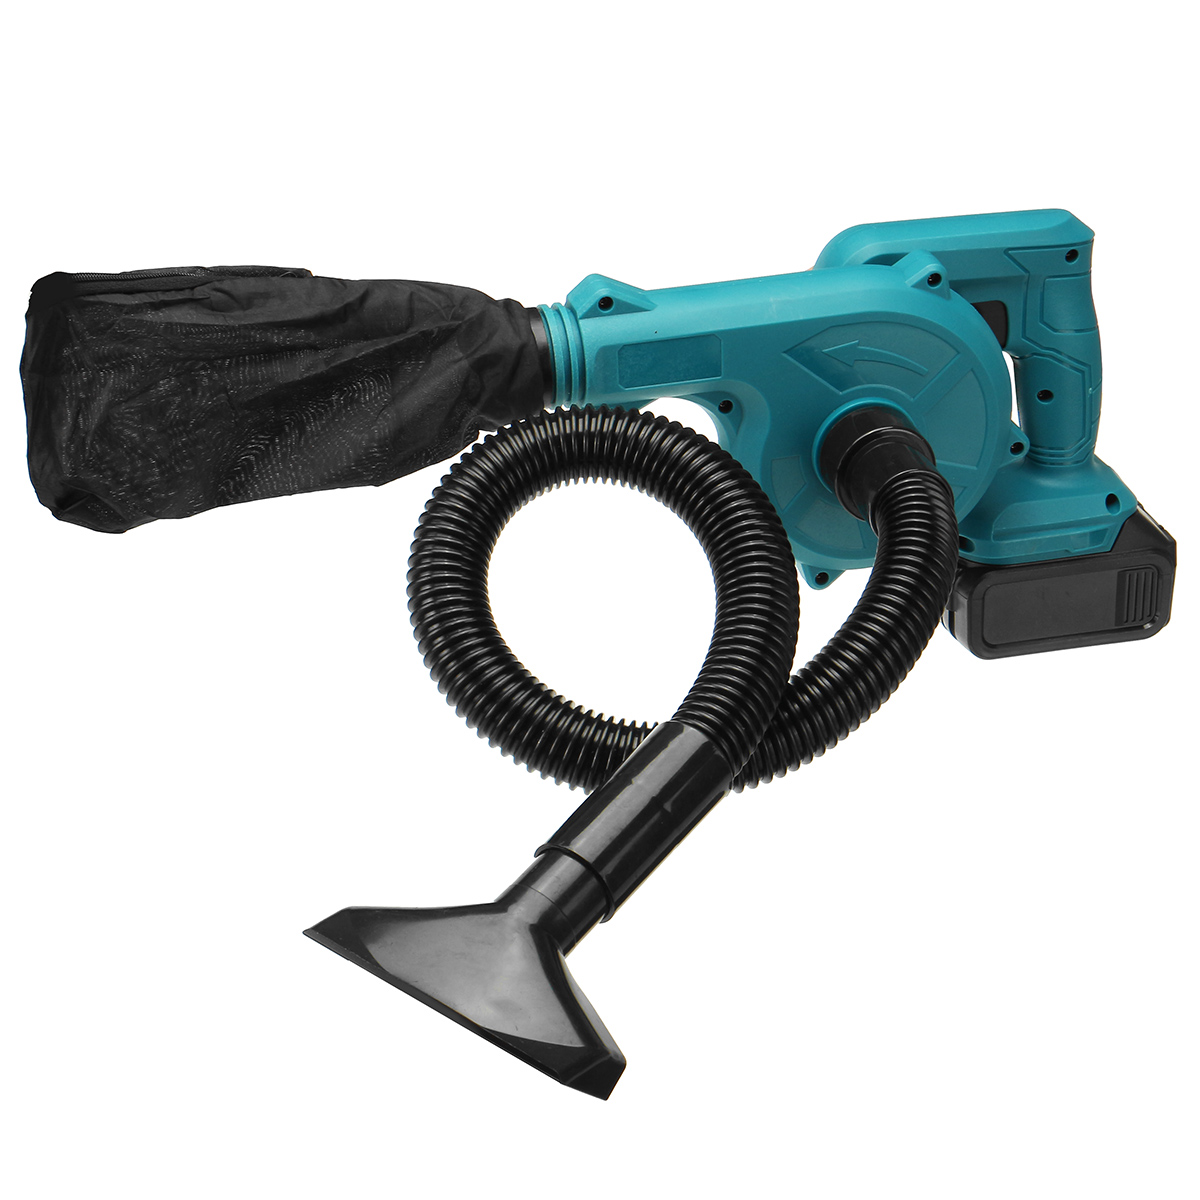 VIOLEWORKS-2-in-1-Electric-Air-Blower-Vacuum-Cleaner-Handheld-Dust-Collecting-Tool-For-Makita18V-Bat-1771460-9